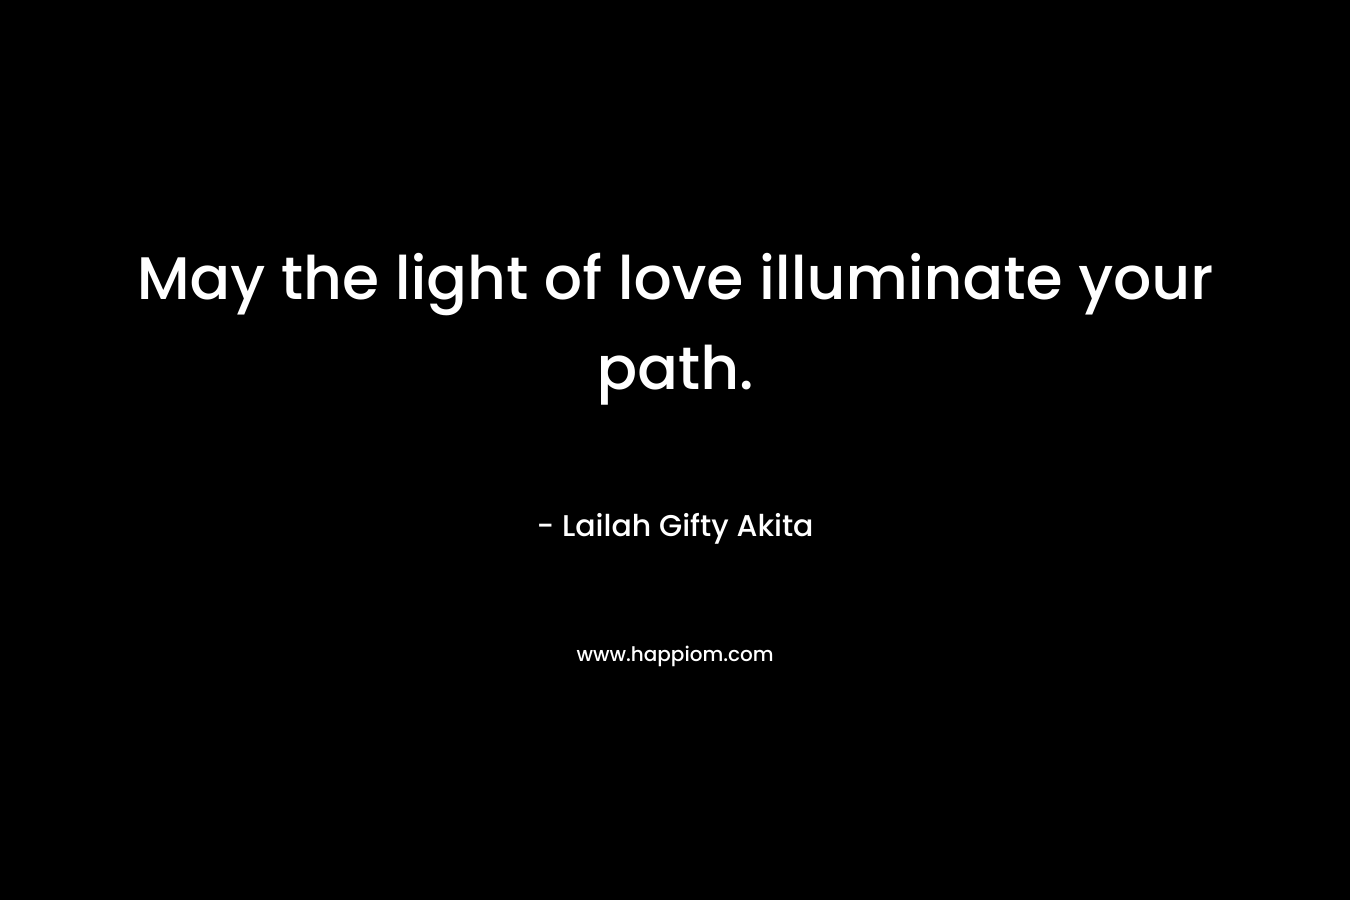 May the light of love illuminate your path.